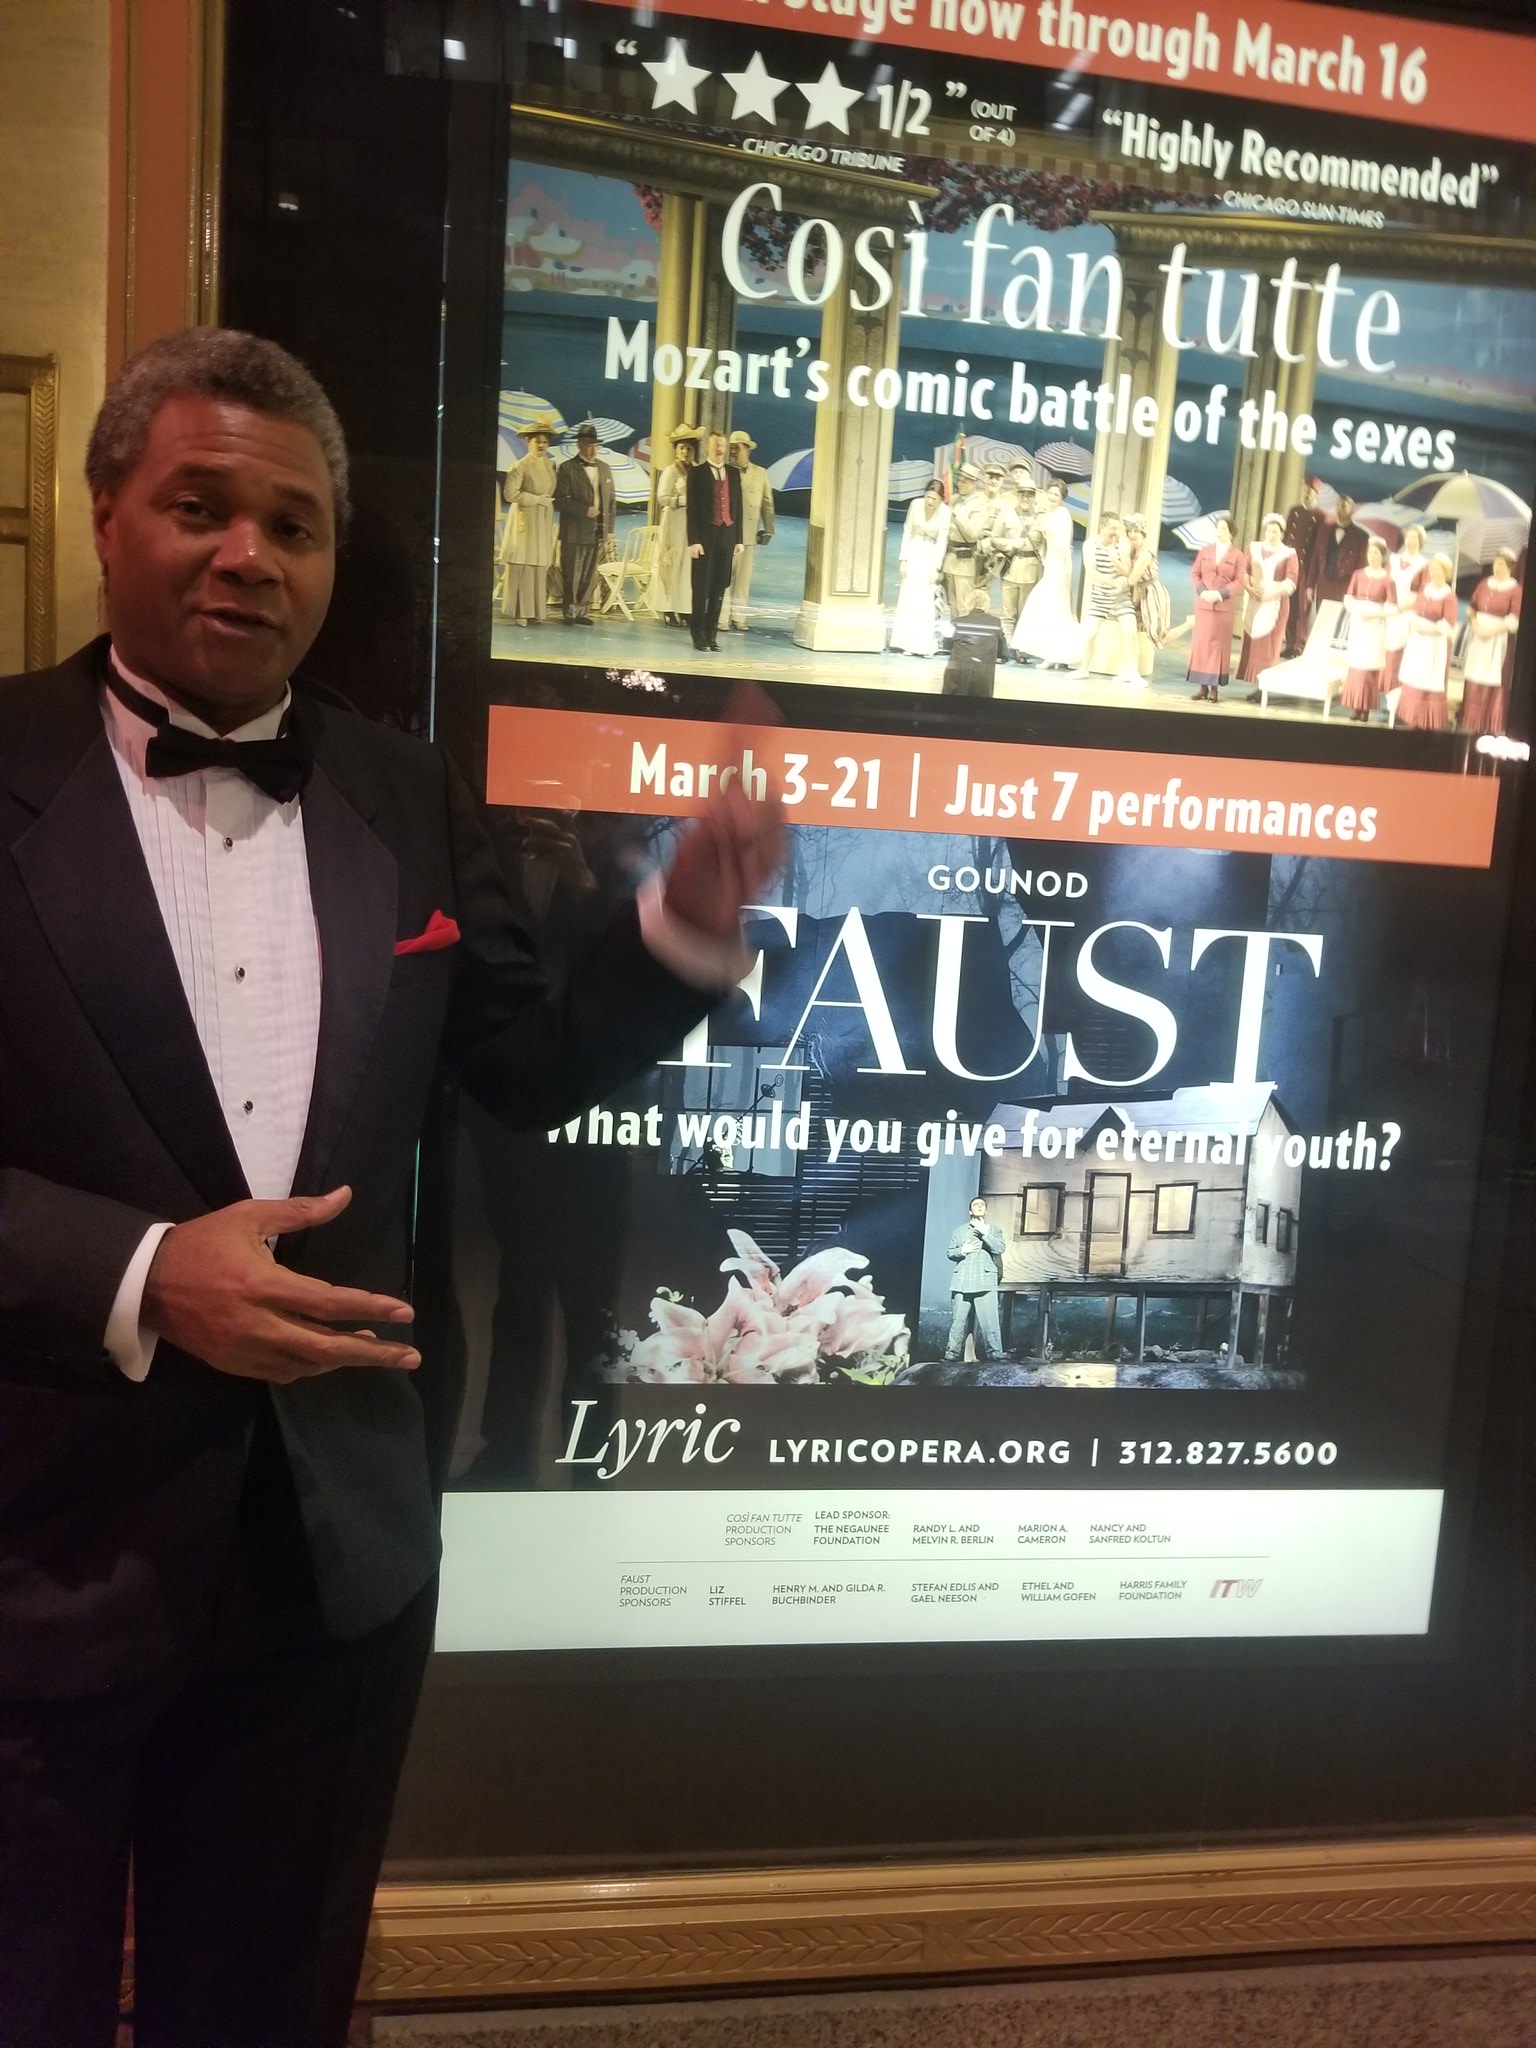 2nd Most Favorite Day Gig Ever: For Darryl Maximilian Robinson it occured between 2018-2019 when for a year he was pleased to provide Customer Service at The Historic Lyric Opera of Chicago.